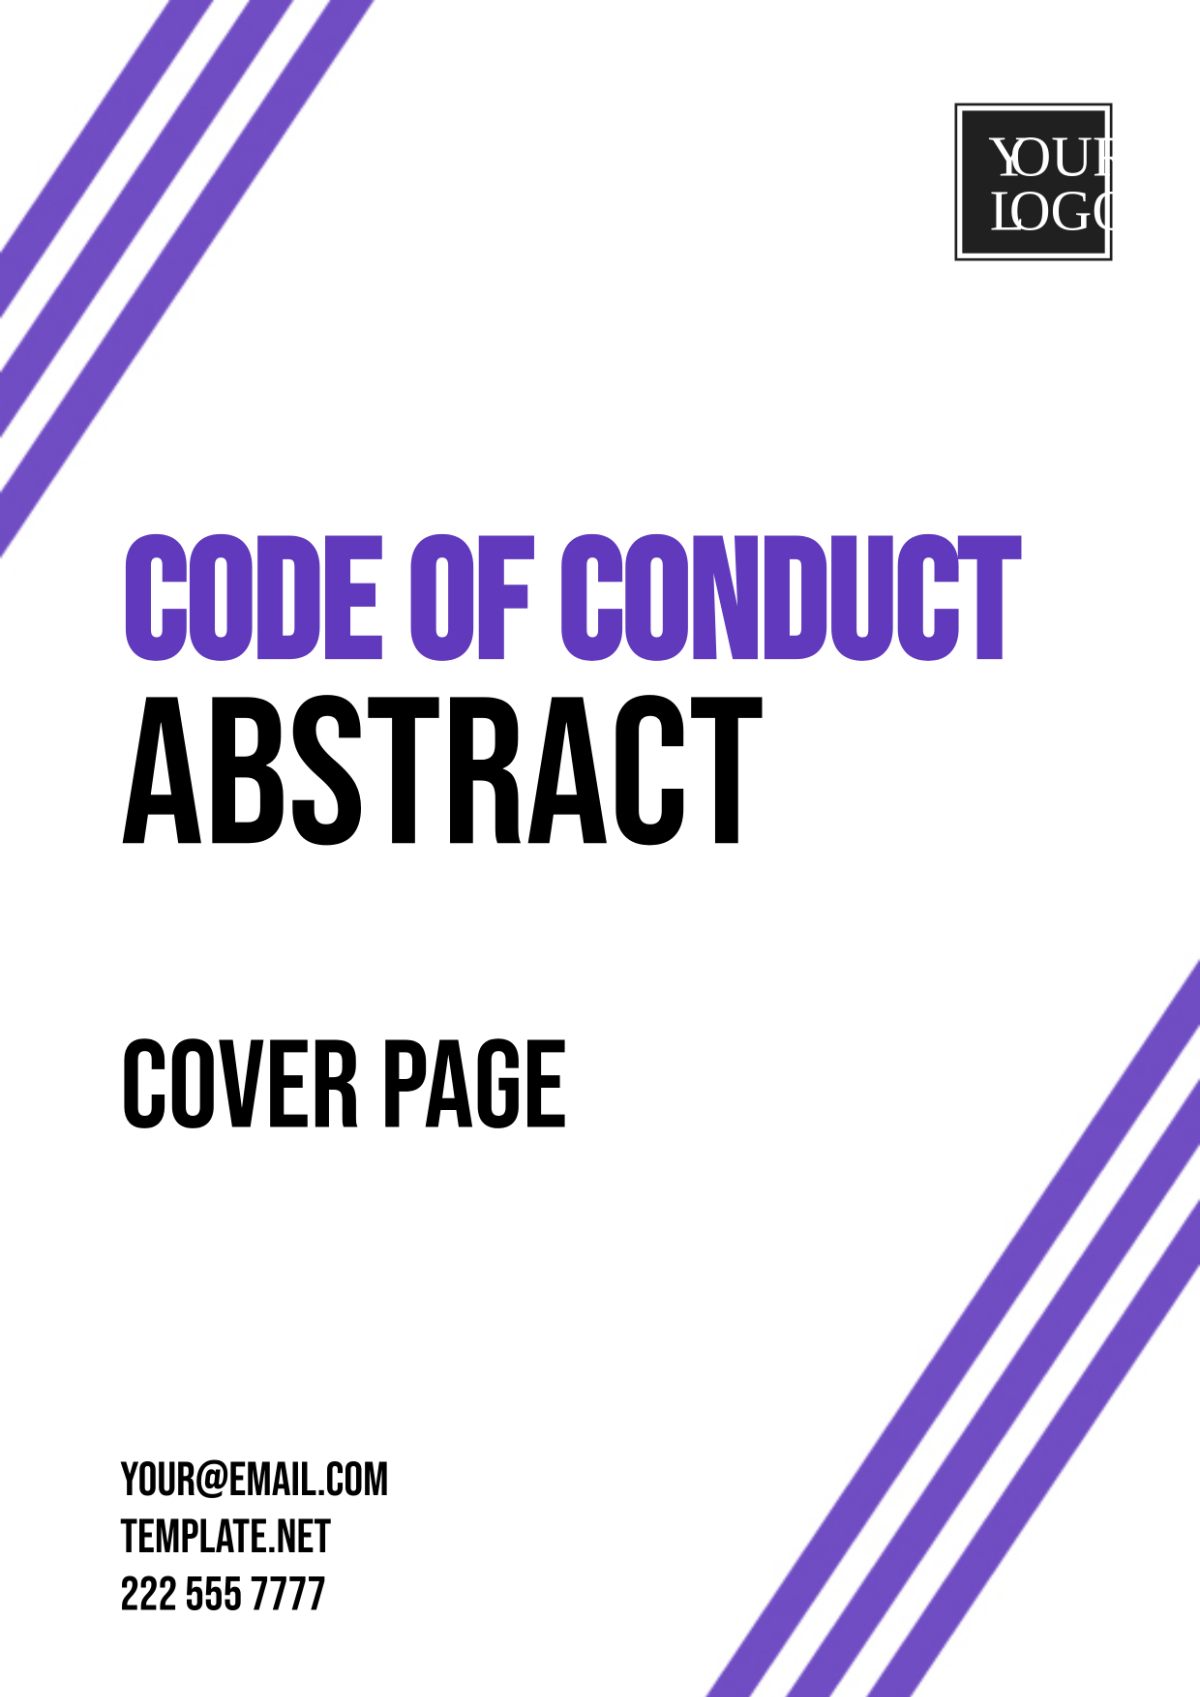 Code of Conduct Abstract Cover Page Template